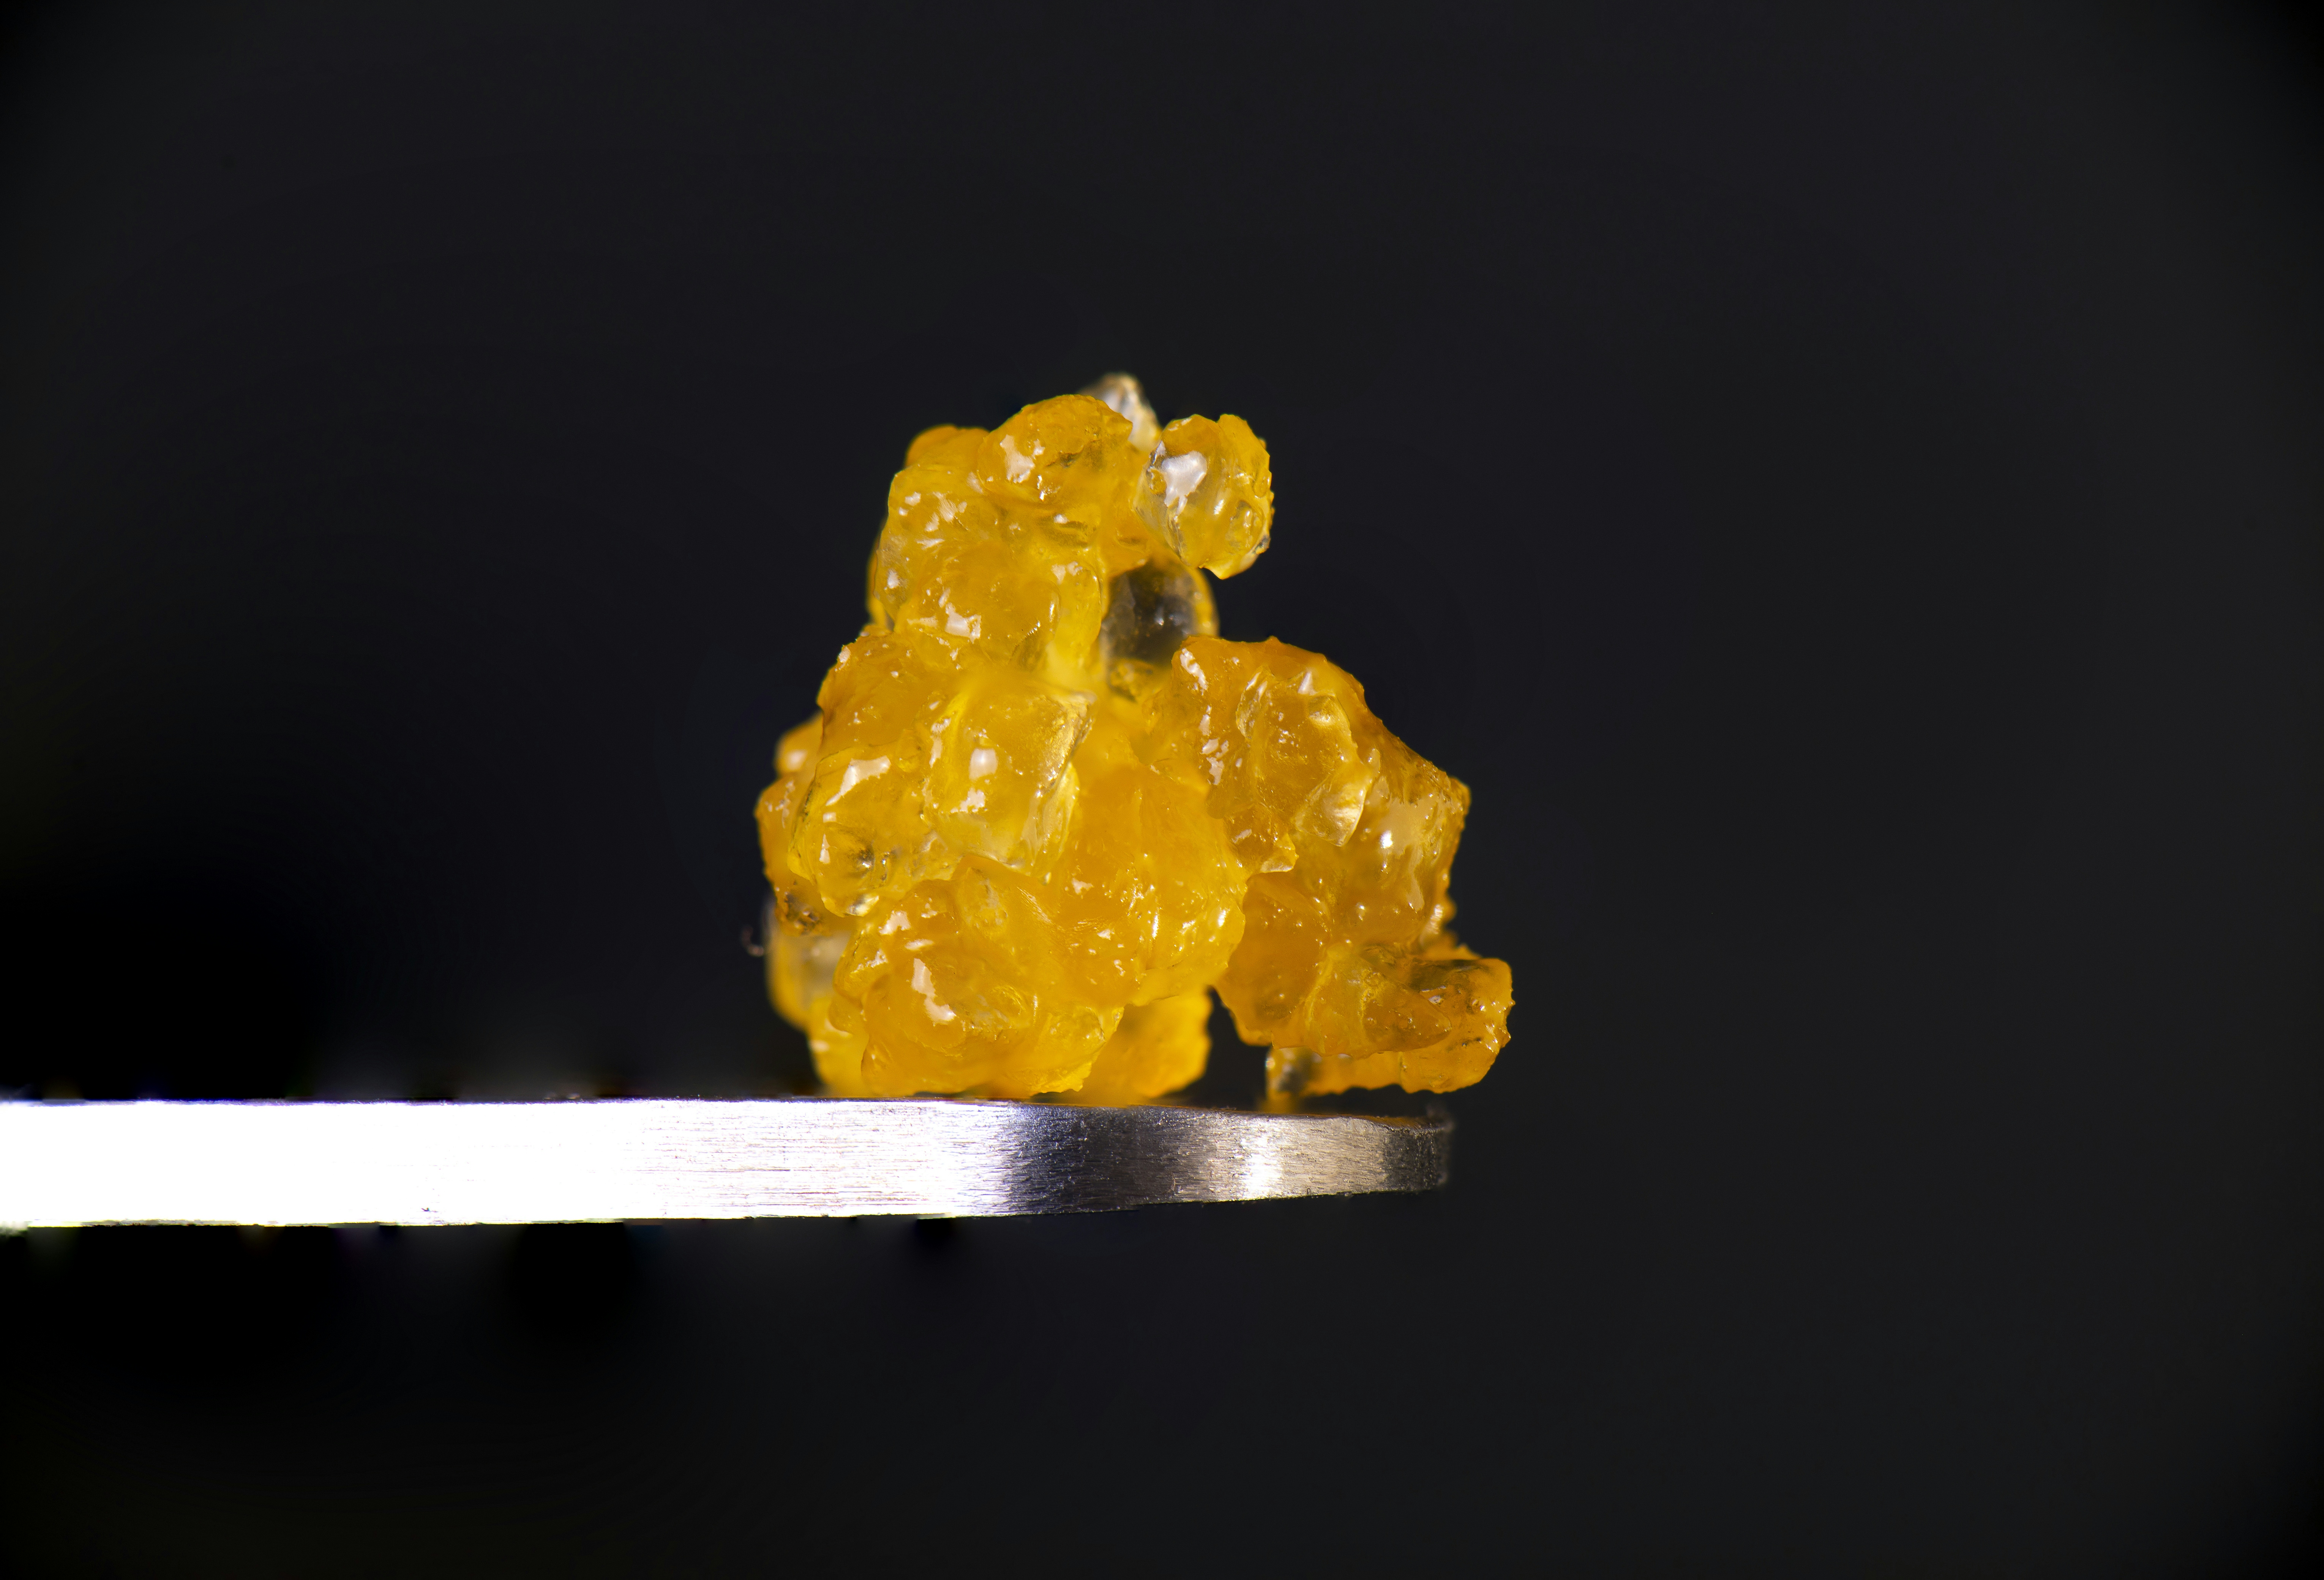 solventless vs solvent based cannabis concentrates